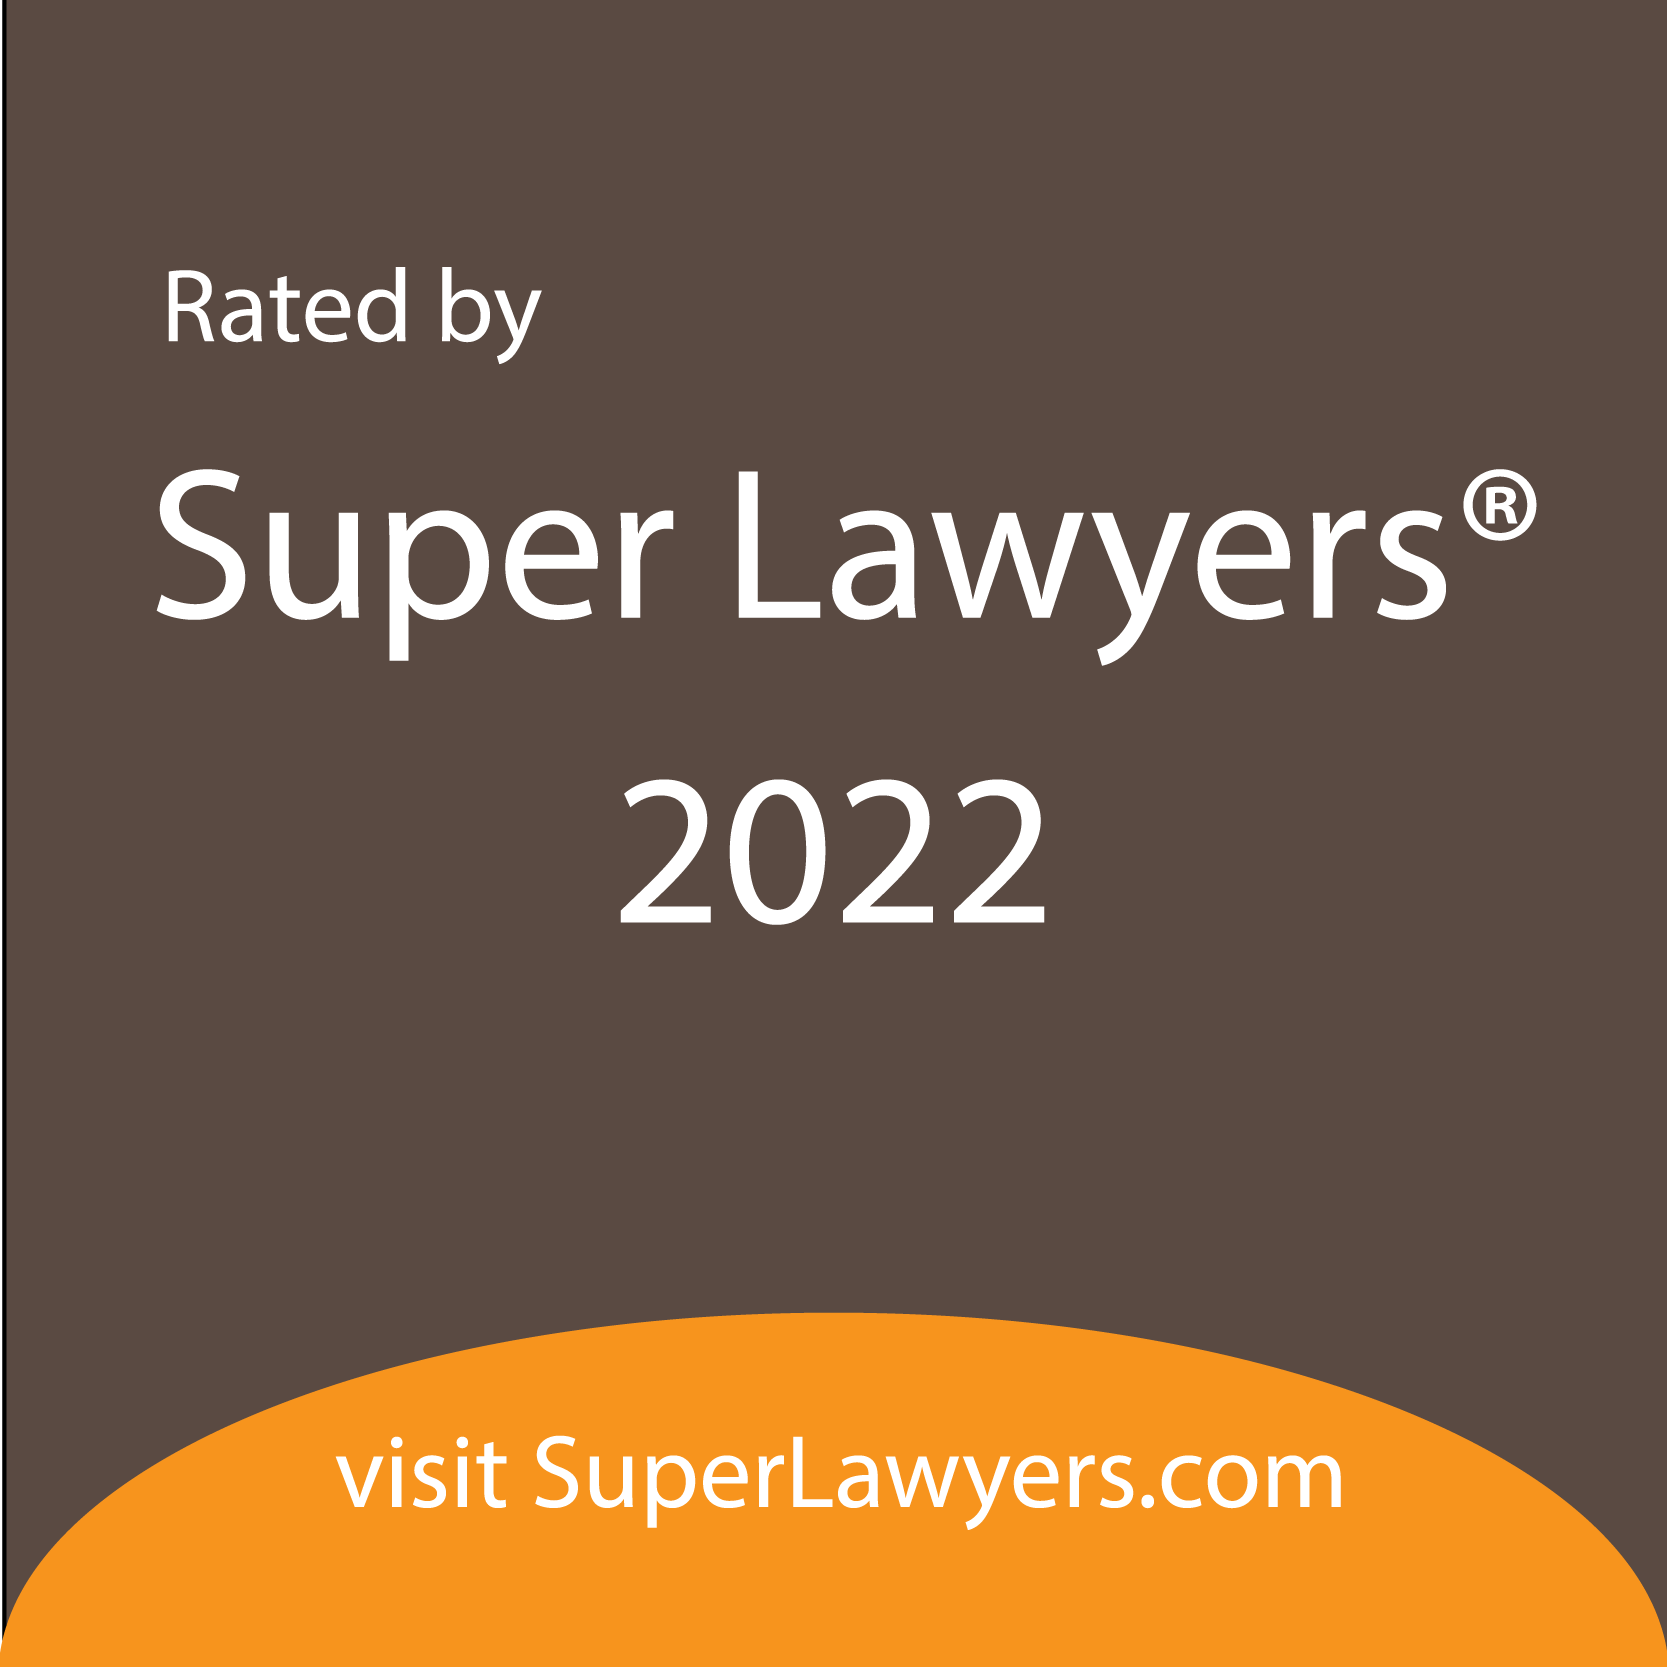 Frame & Frame Recognized as 2022 Super Lawyers